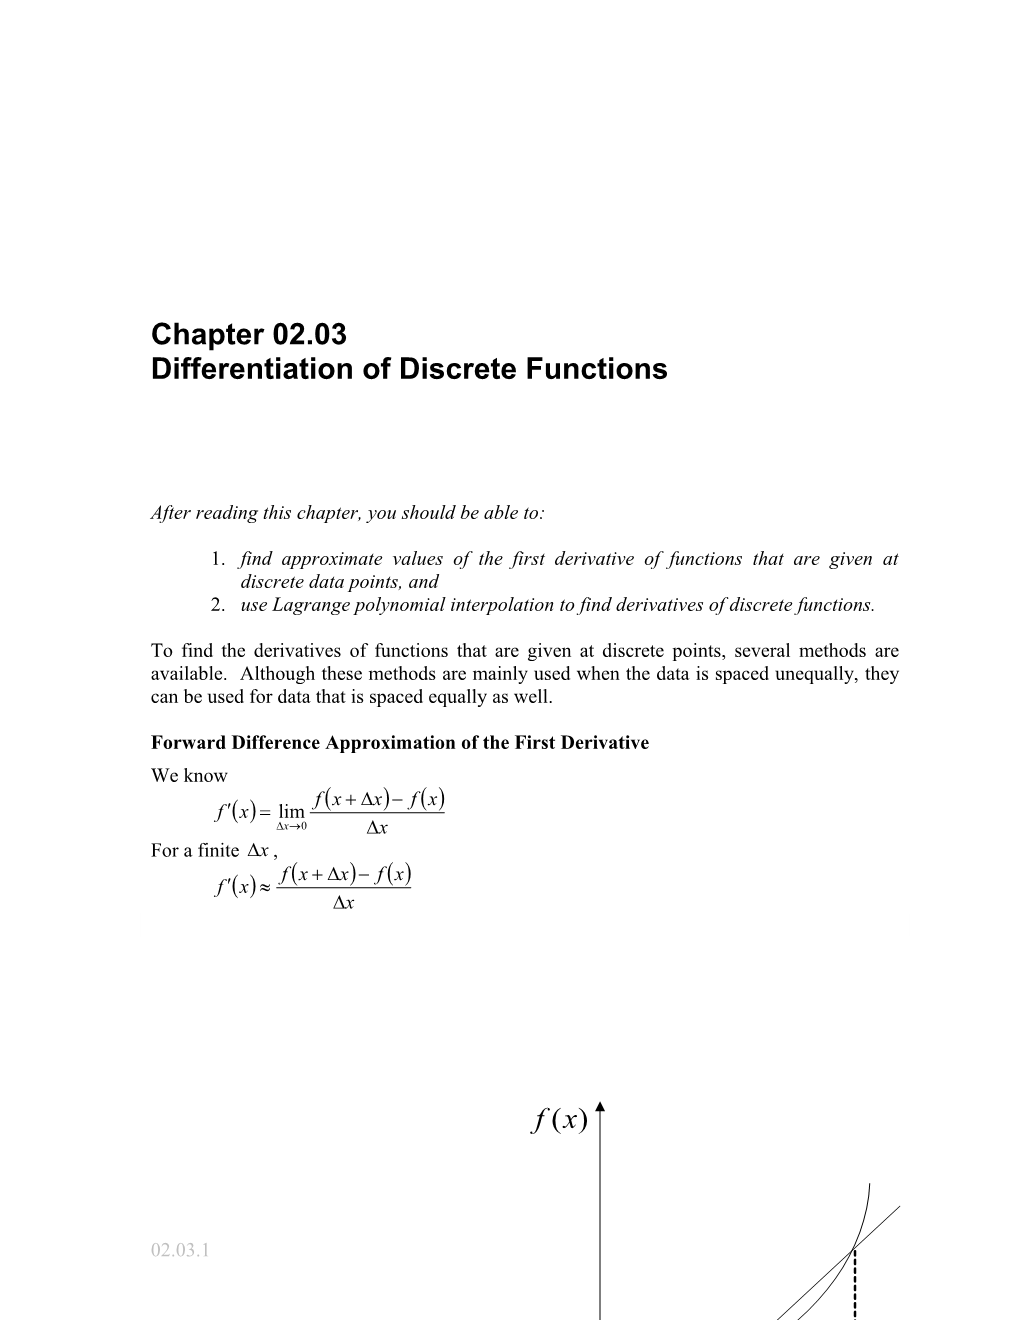 Differentiation of Discrete Functions: General Engineering